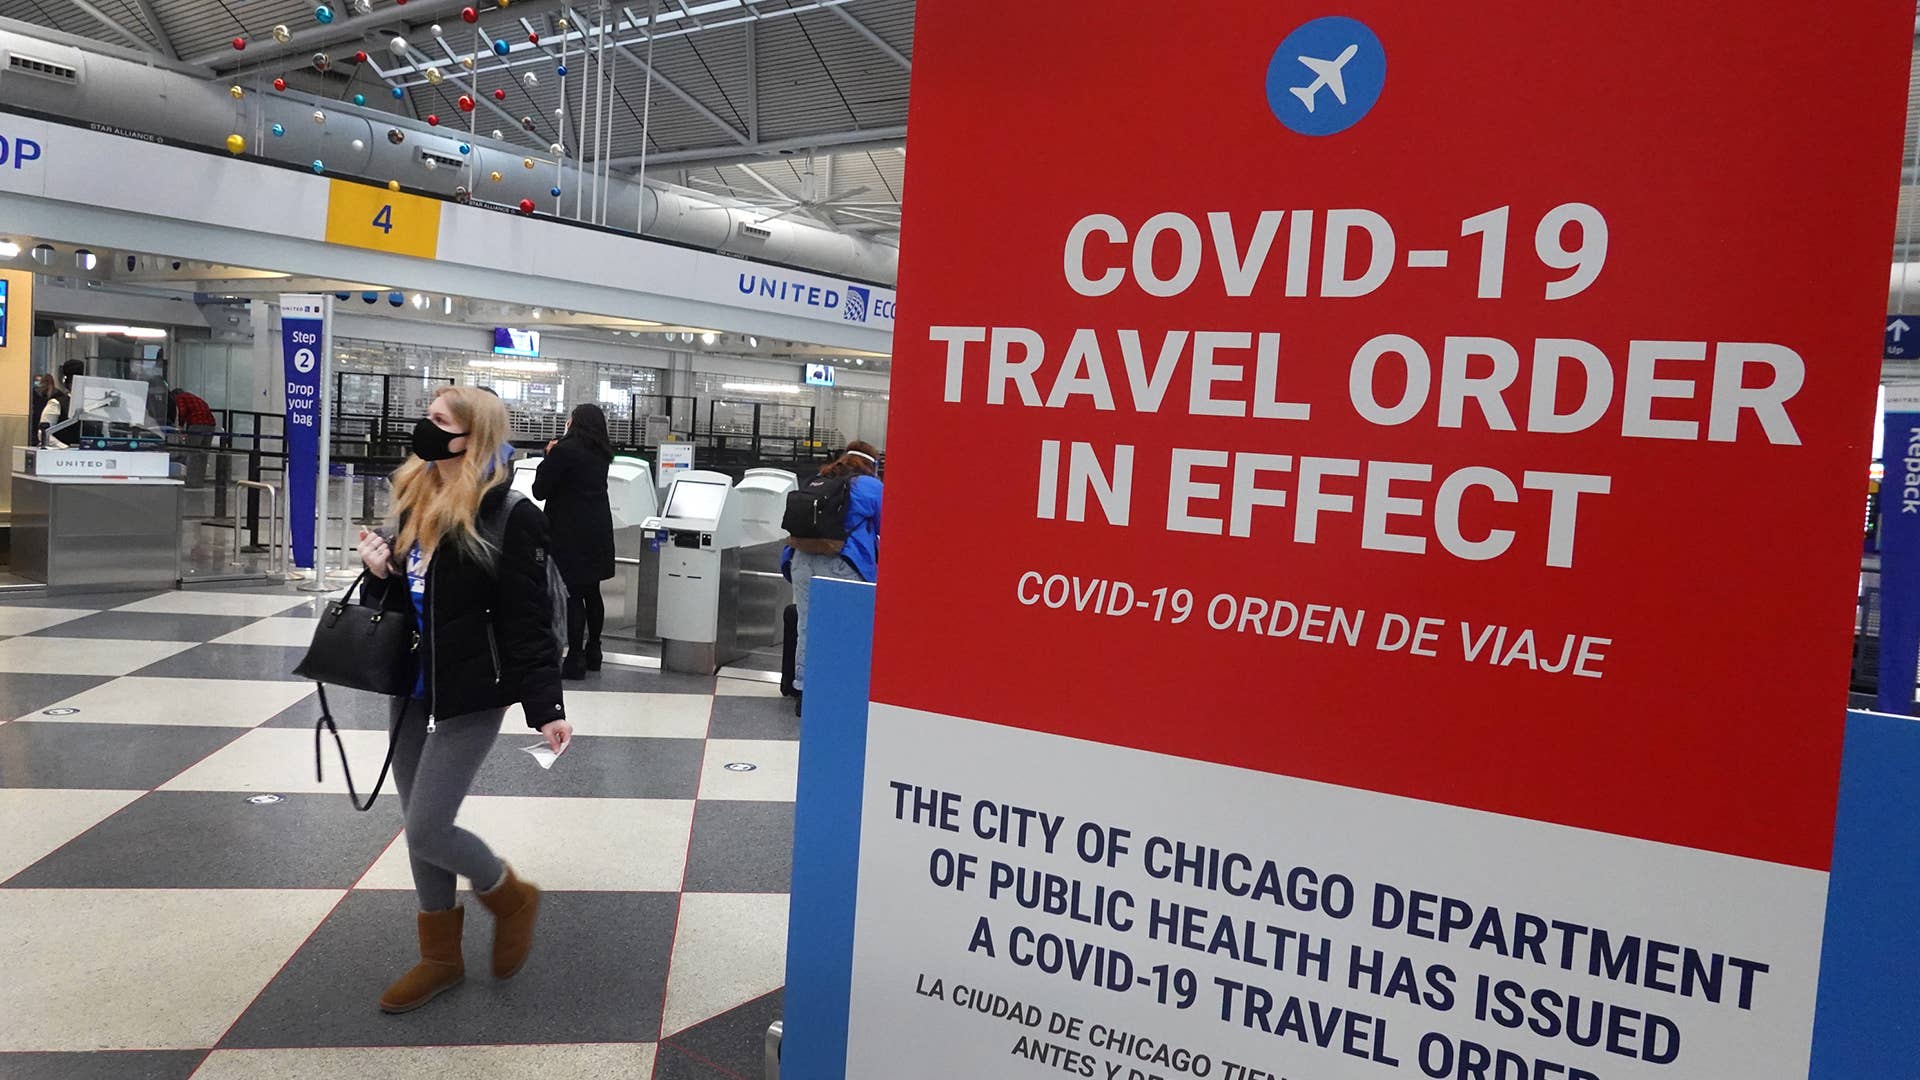 Chicago's O'Hare International Airport, COVID-19 travel order in effect sign.